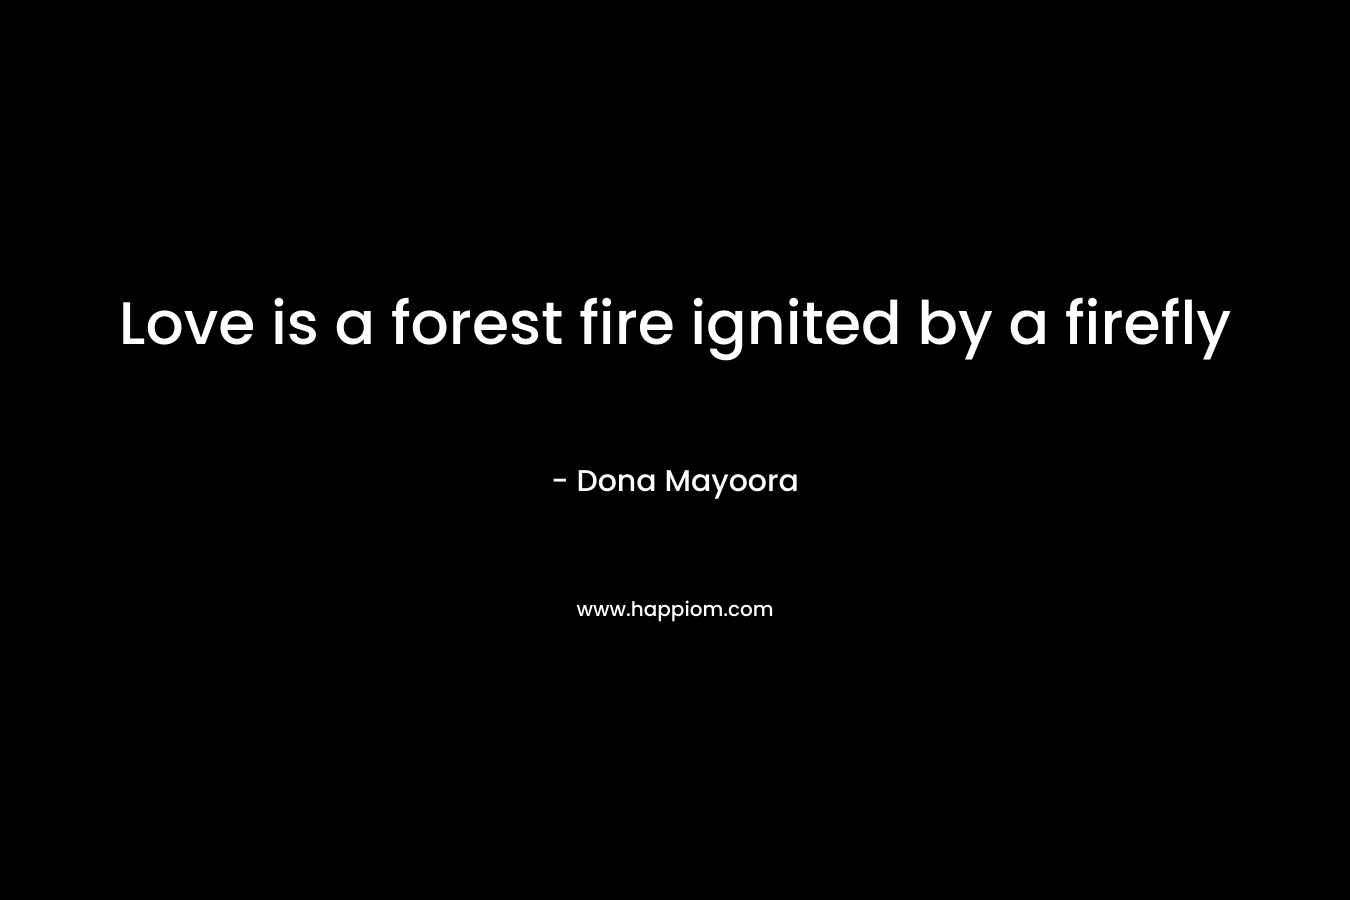 Love is a forest fire ignited by a firefly